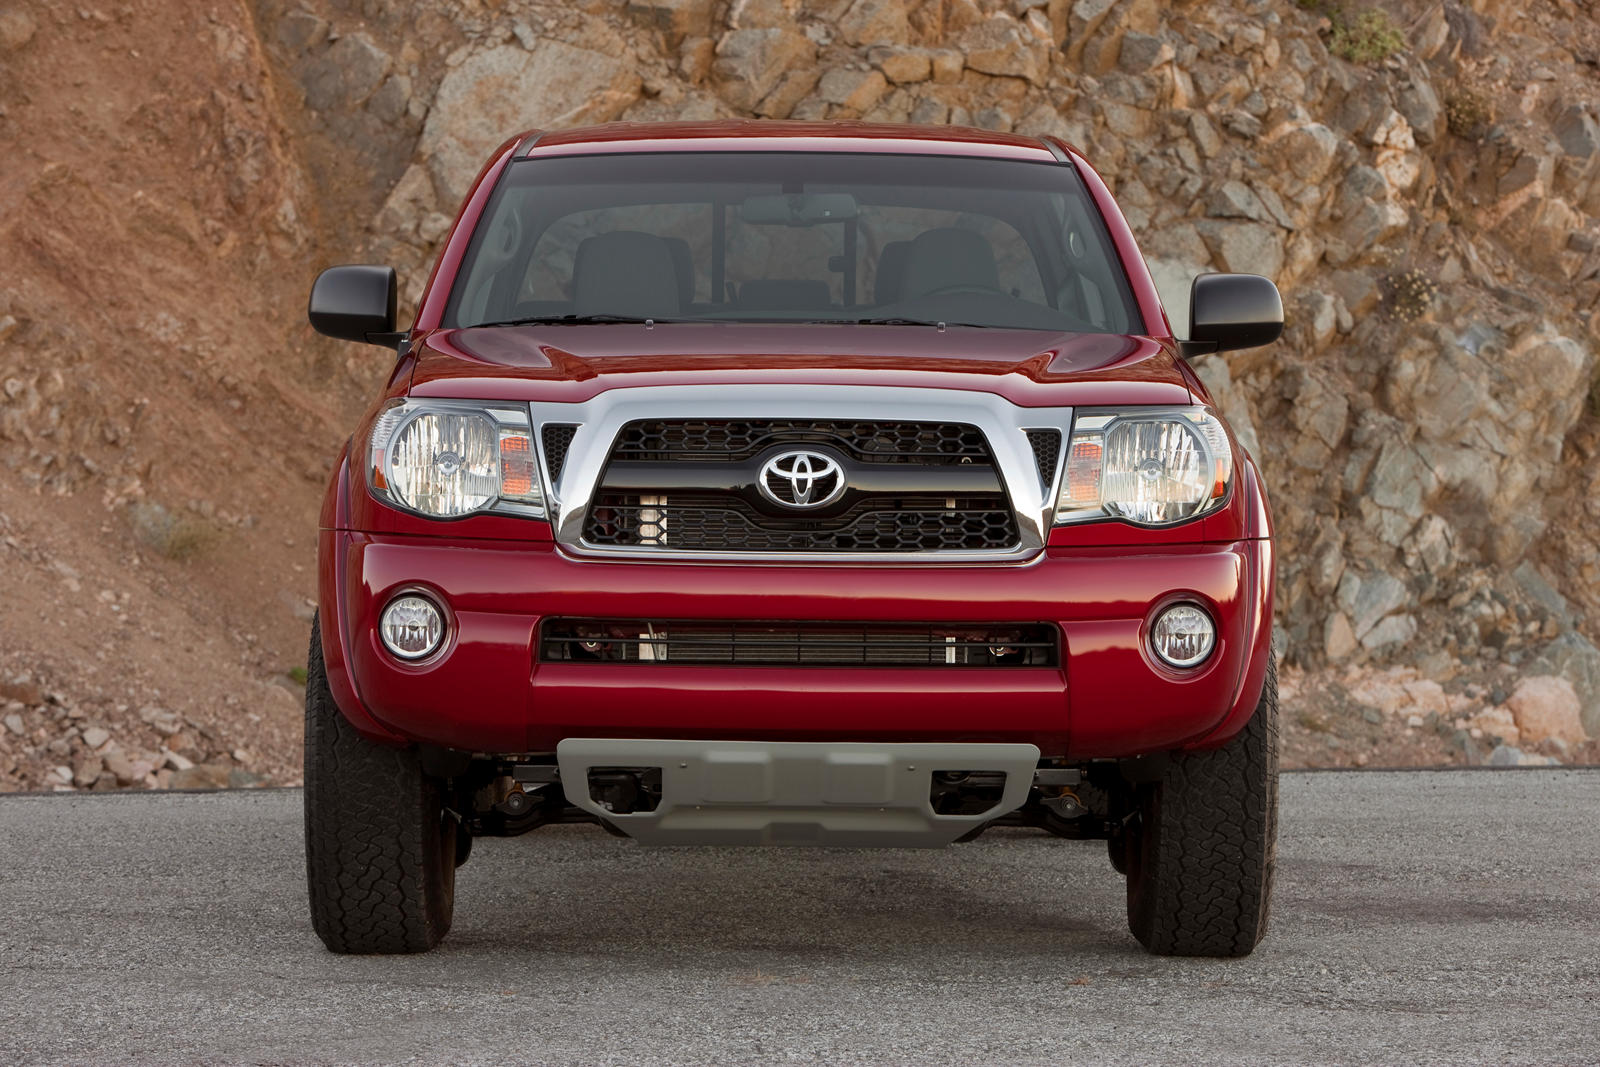 2010 Toyota Tacoma Front View